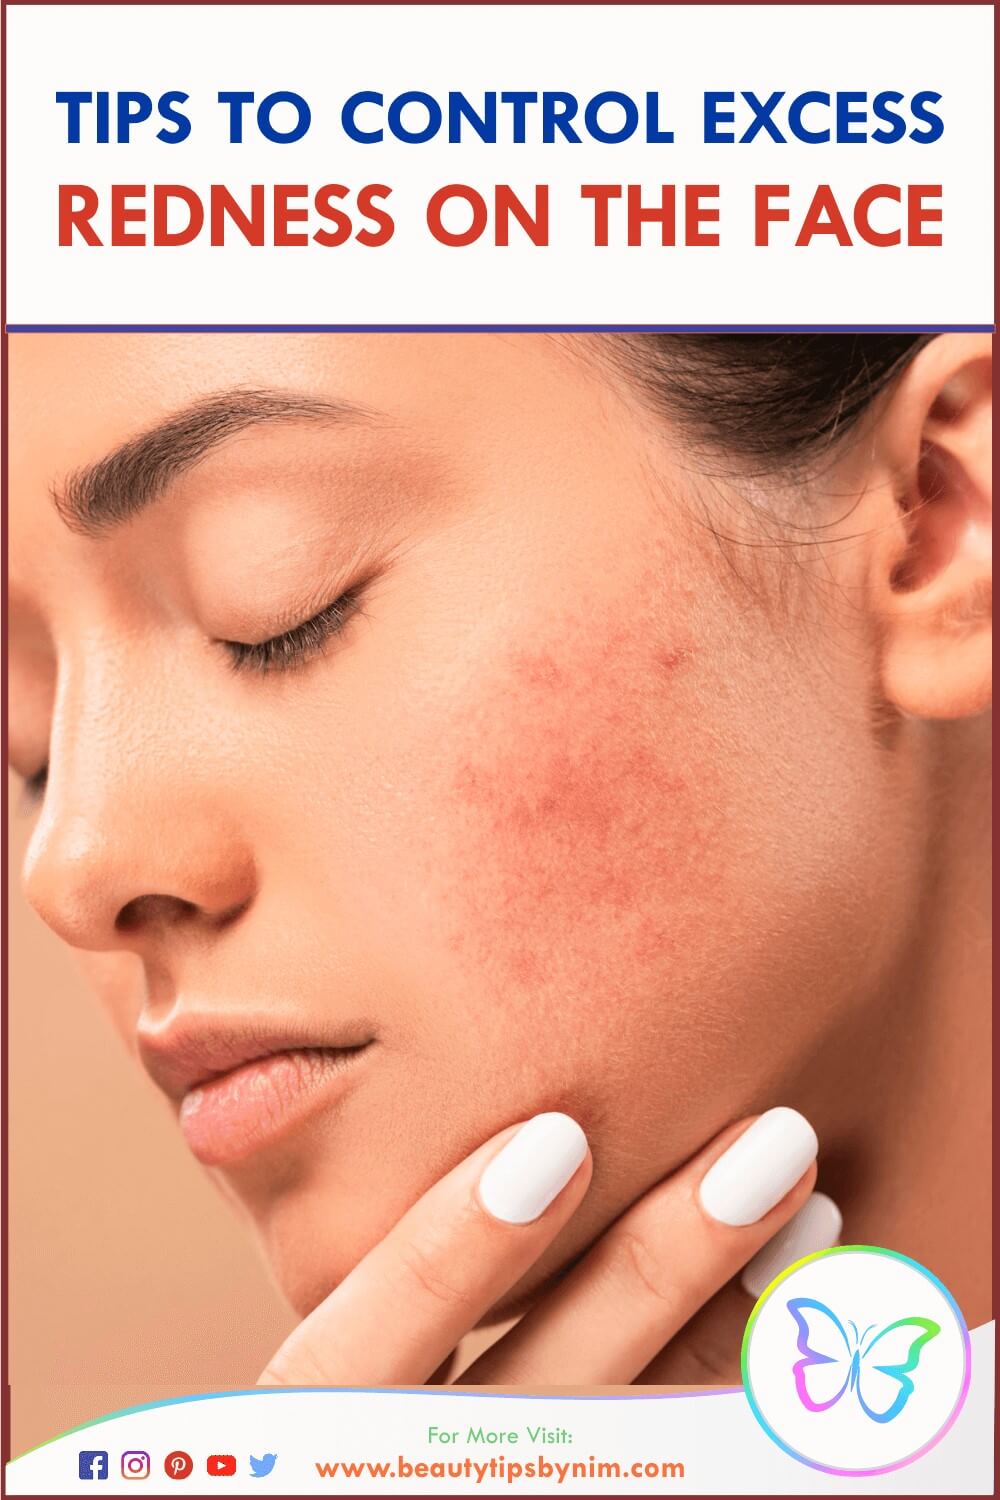 Tips to Control Excess Redness on the Face With Pictures - Beauty Tips By Nim - Nimisha Goyal - HashBUGS - BTN - Nimify Beauty - beautytipsbynim.com